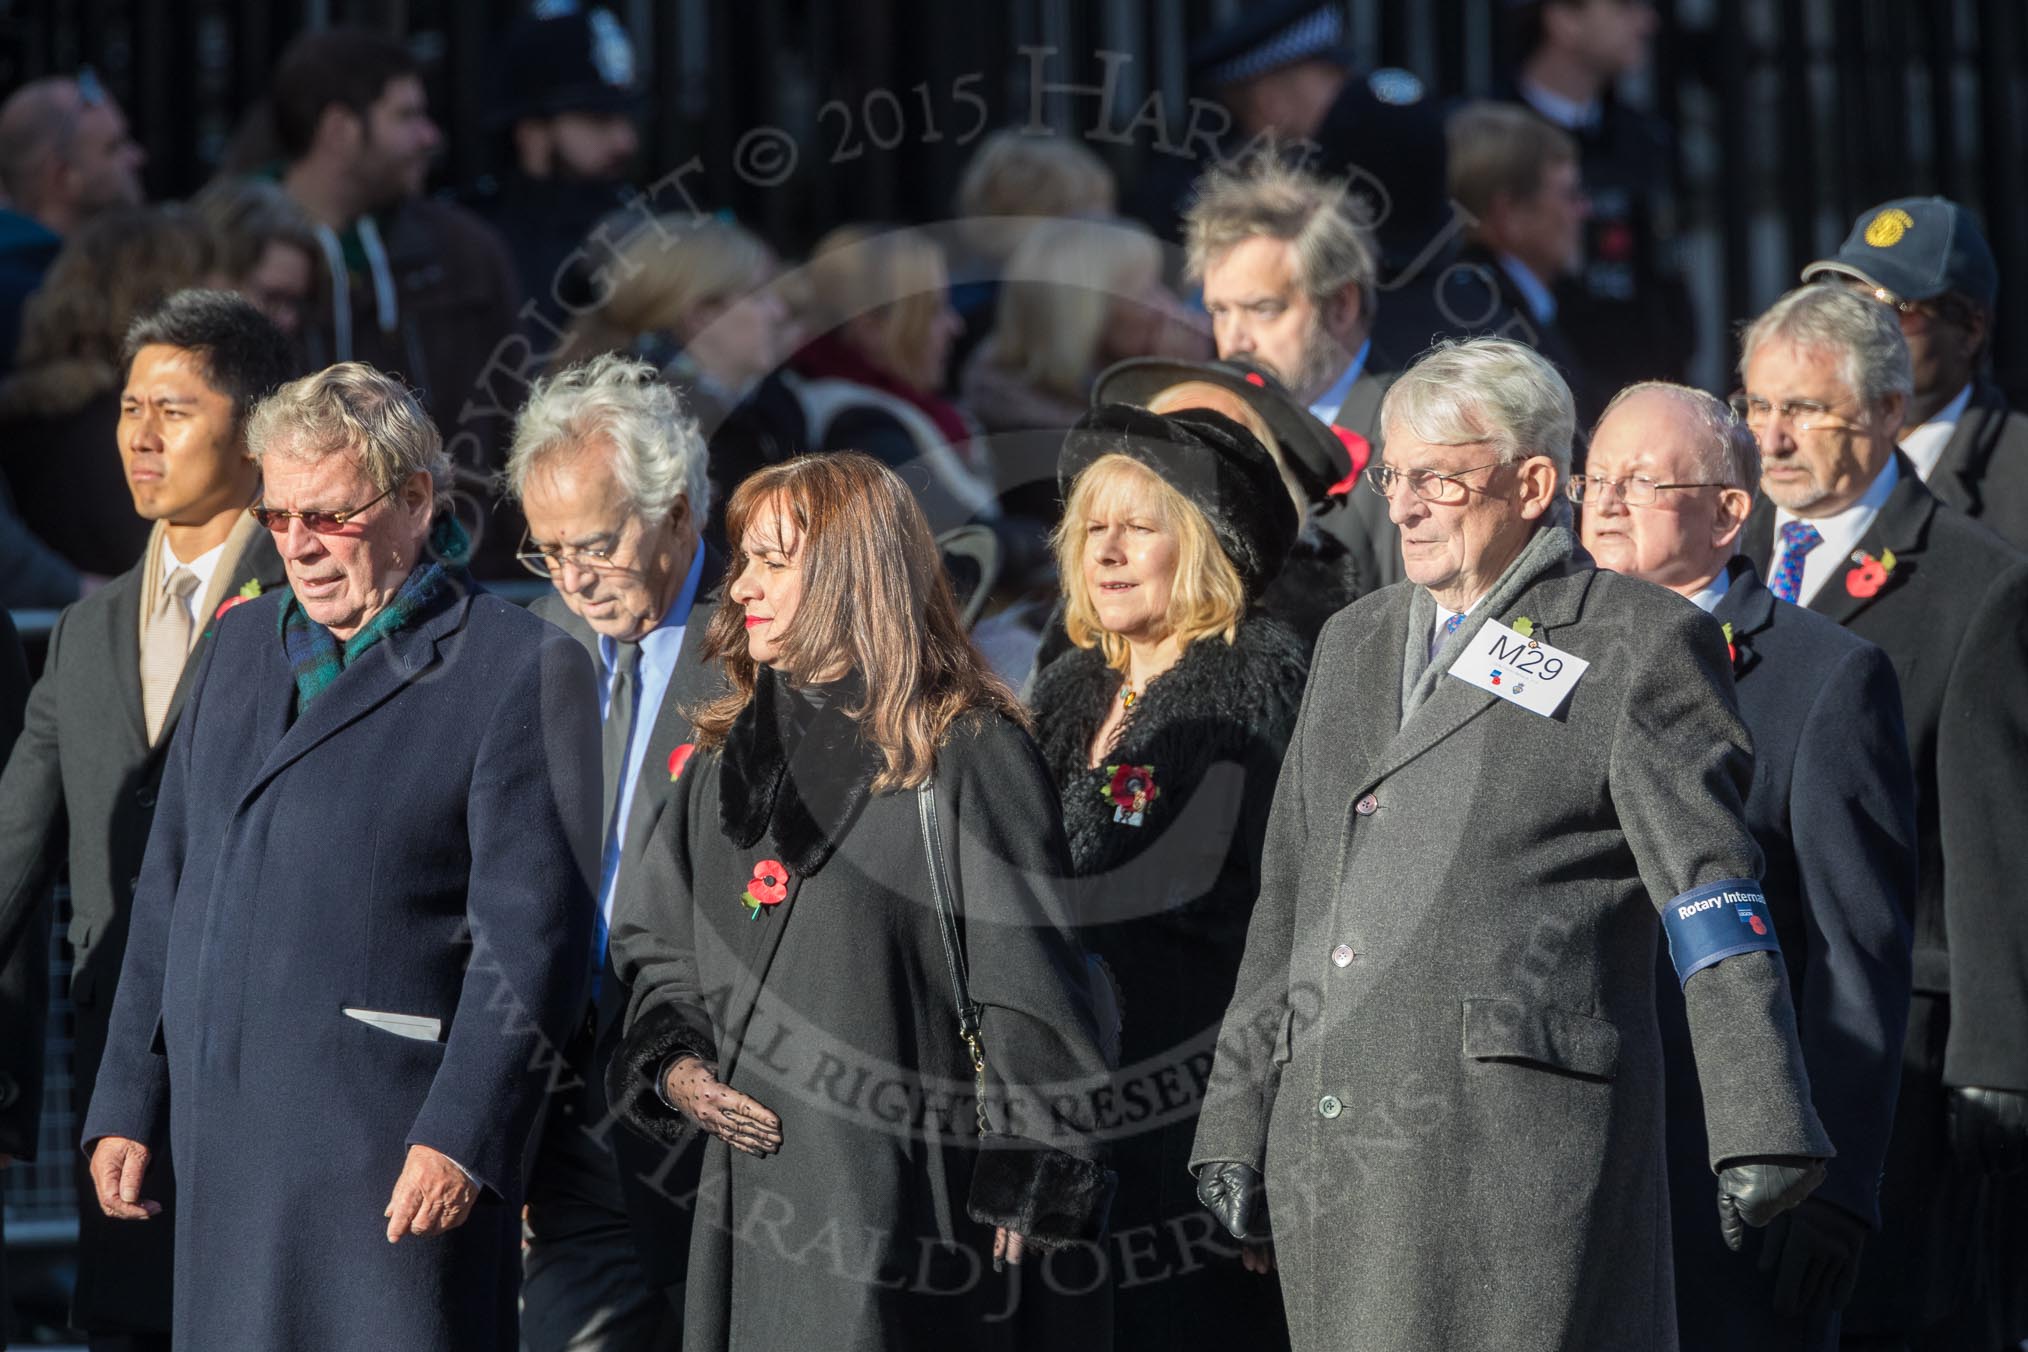 March Past, Remembrance Sunday at the Cenotaph 2016: M29 Rotary International.
Cenotaph, Whitehall, London SW1,
London,
Greater London,
United Kingdom,
on 13 November 2016 at 13:17, image #2754